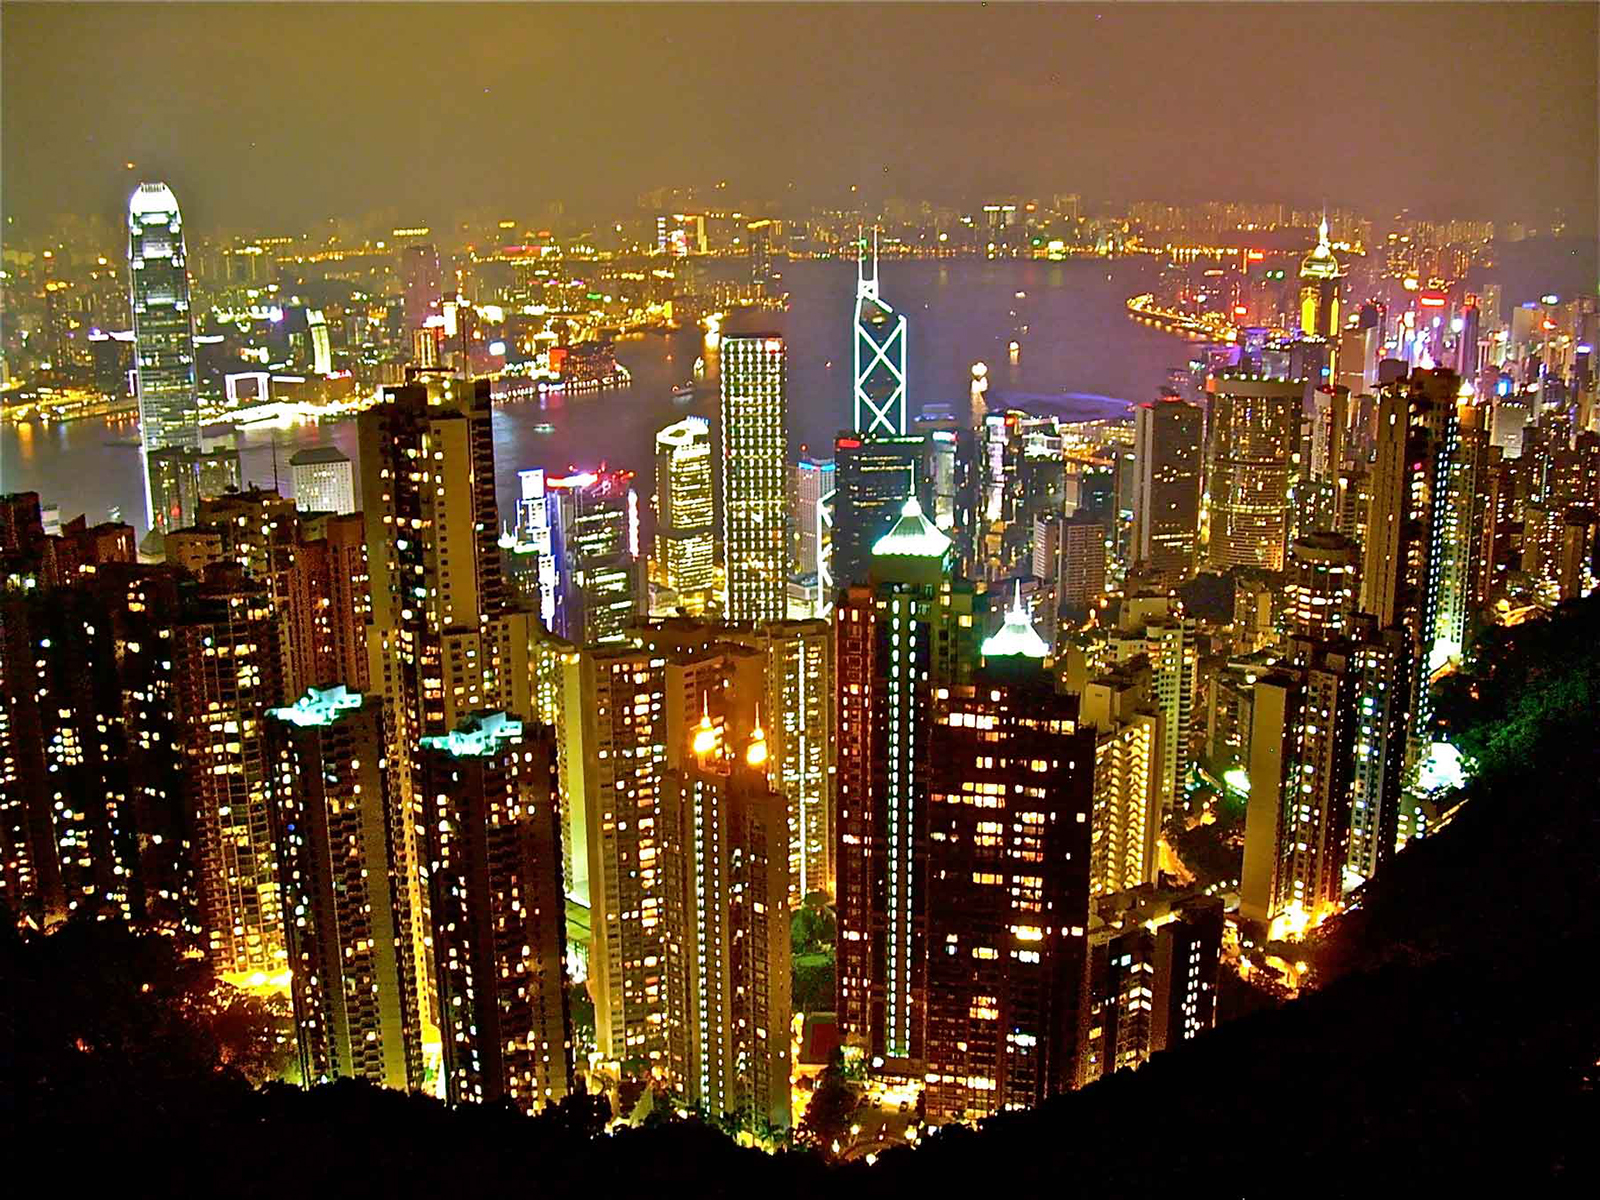 COUNTRY WITH THE HIGHEST AVERAGE IQ- There are a lot of factors that can affect an IQ score, ranging from national and personal wealth to simply who makes the test. As a result, these findings are highly controversial, but seem to suggest that Hong Kong is the country with the highest IQ, at an average of 107 points.